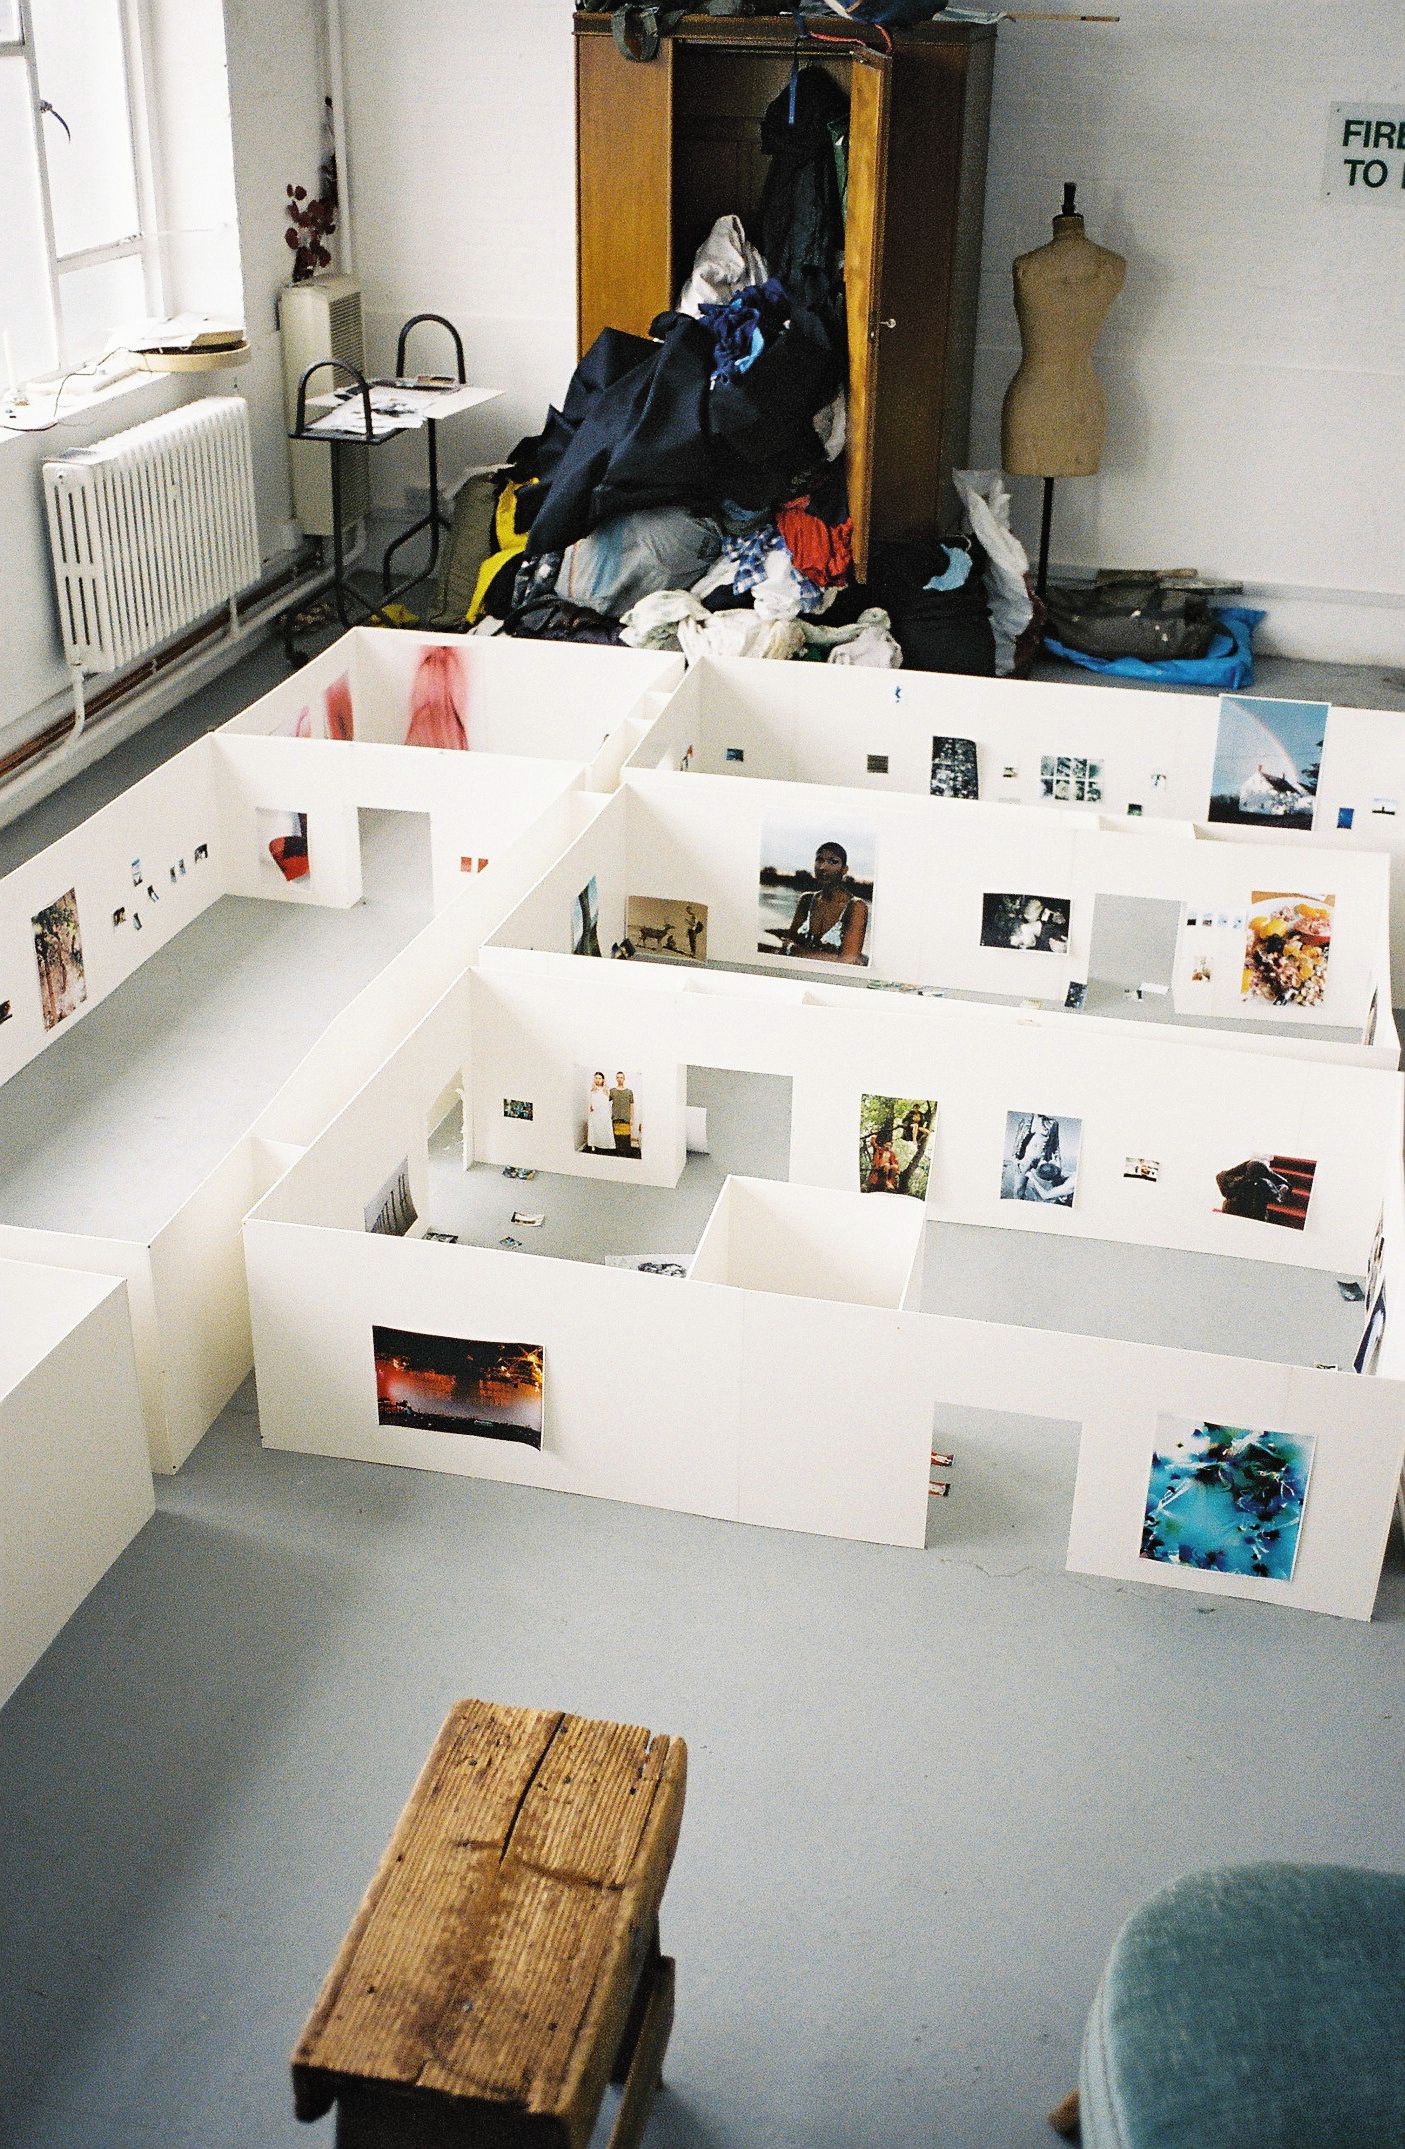 PIN–UP | WOLFGANG TILLMANS AND HIS ARCHIVE OF 1:10 EXHIBITION MOCK-UPS